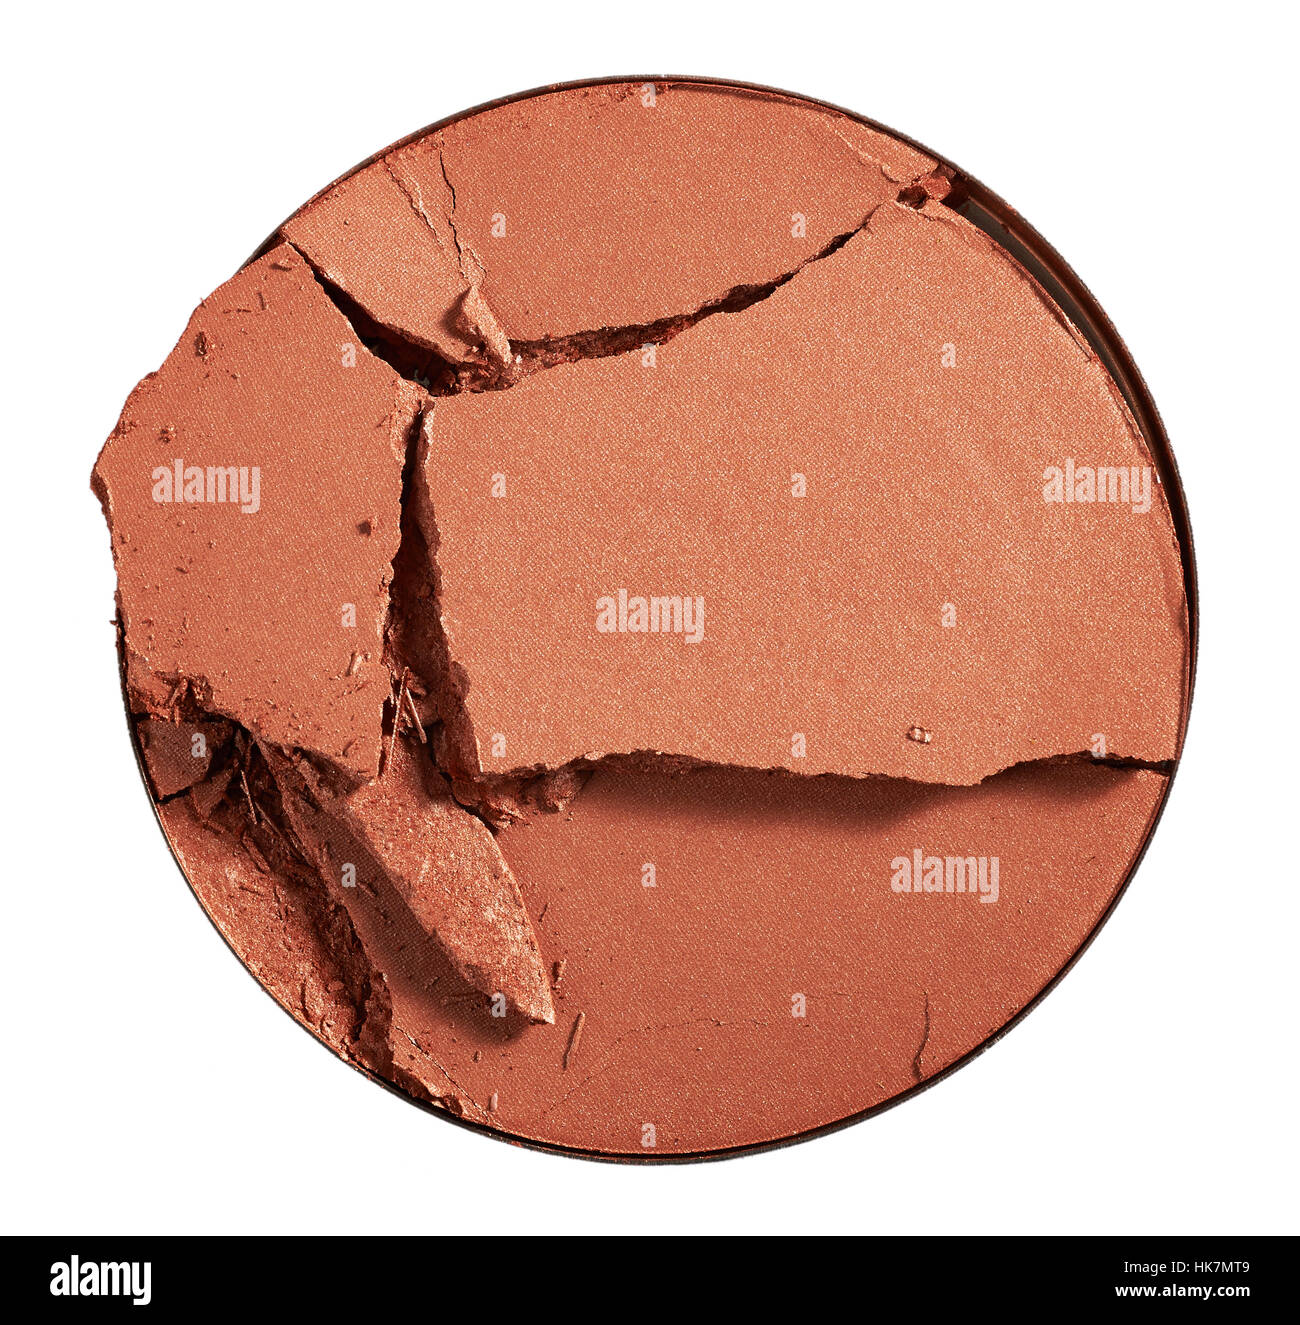 A beauty cut-out image of a sample make up powder. A broken circle-shaped compact of flesh, brown or tan coloured make-up or bronzer. Stock Photo